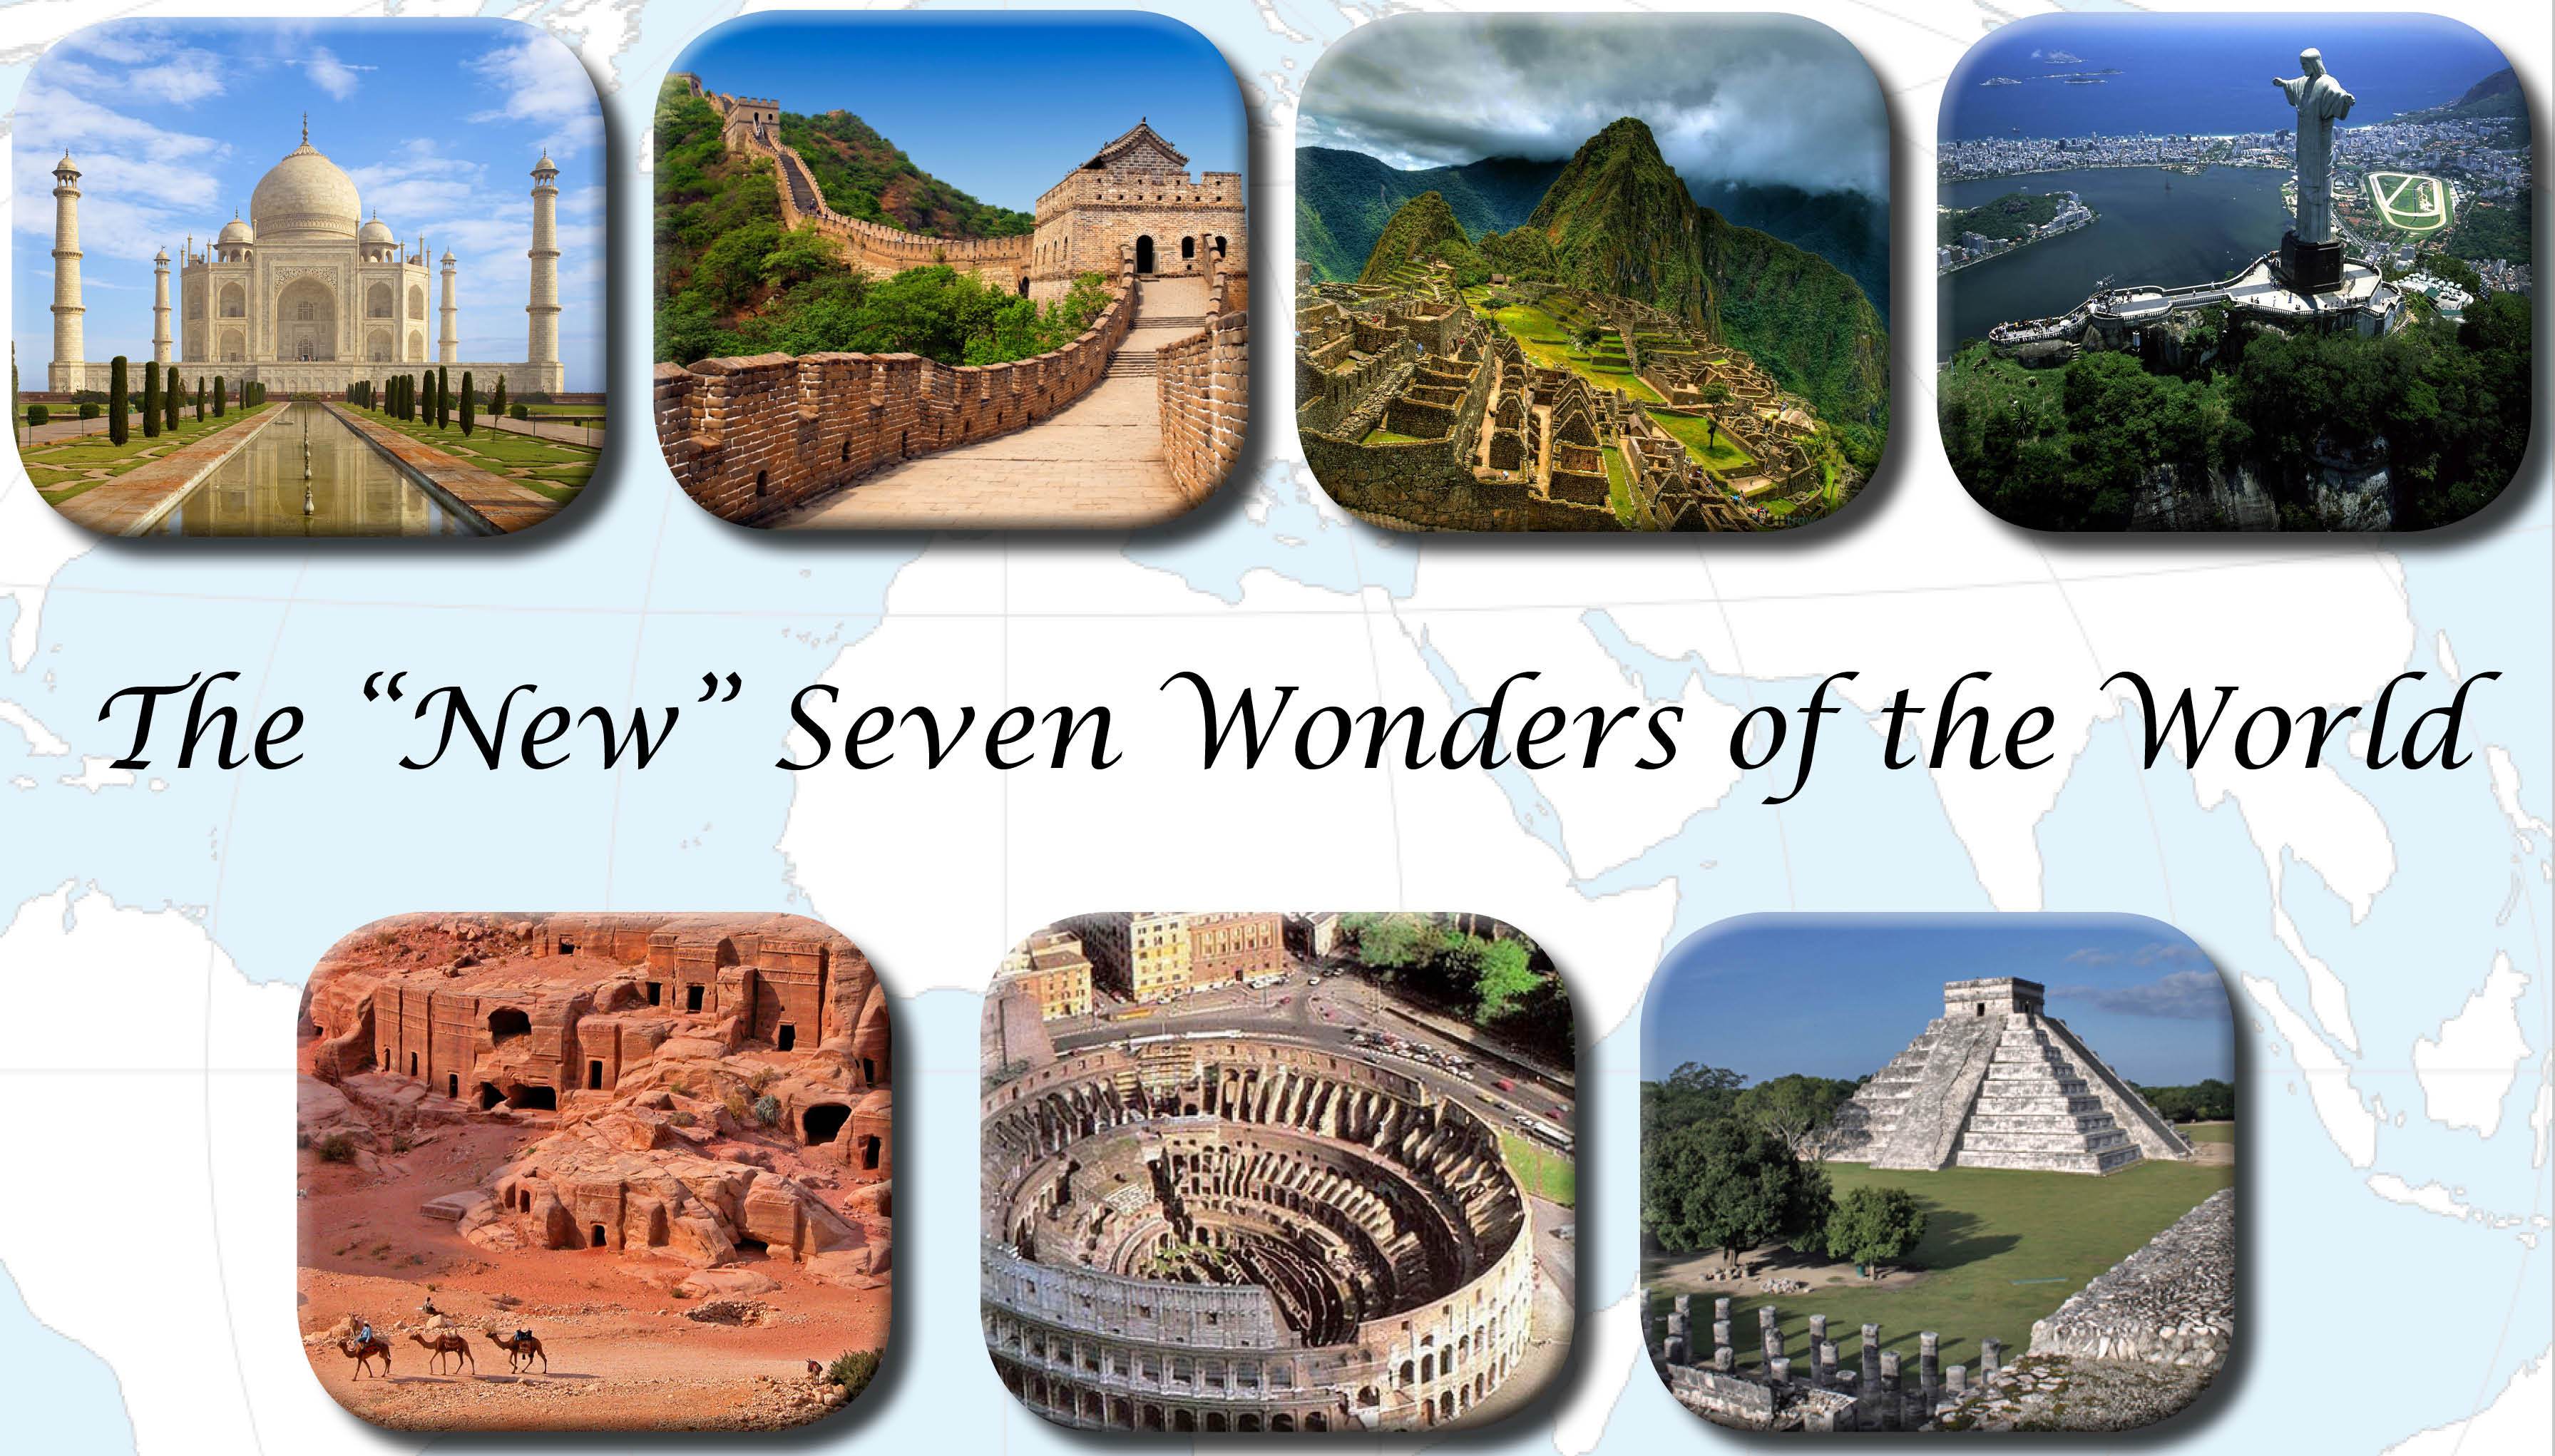 Seven wonders of the world are. Семь чудес света семь чудес света. Чудеса света 7 чудес. Современные чудеса света. Чудеса света коллаж.